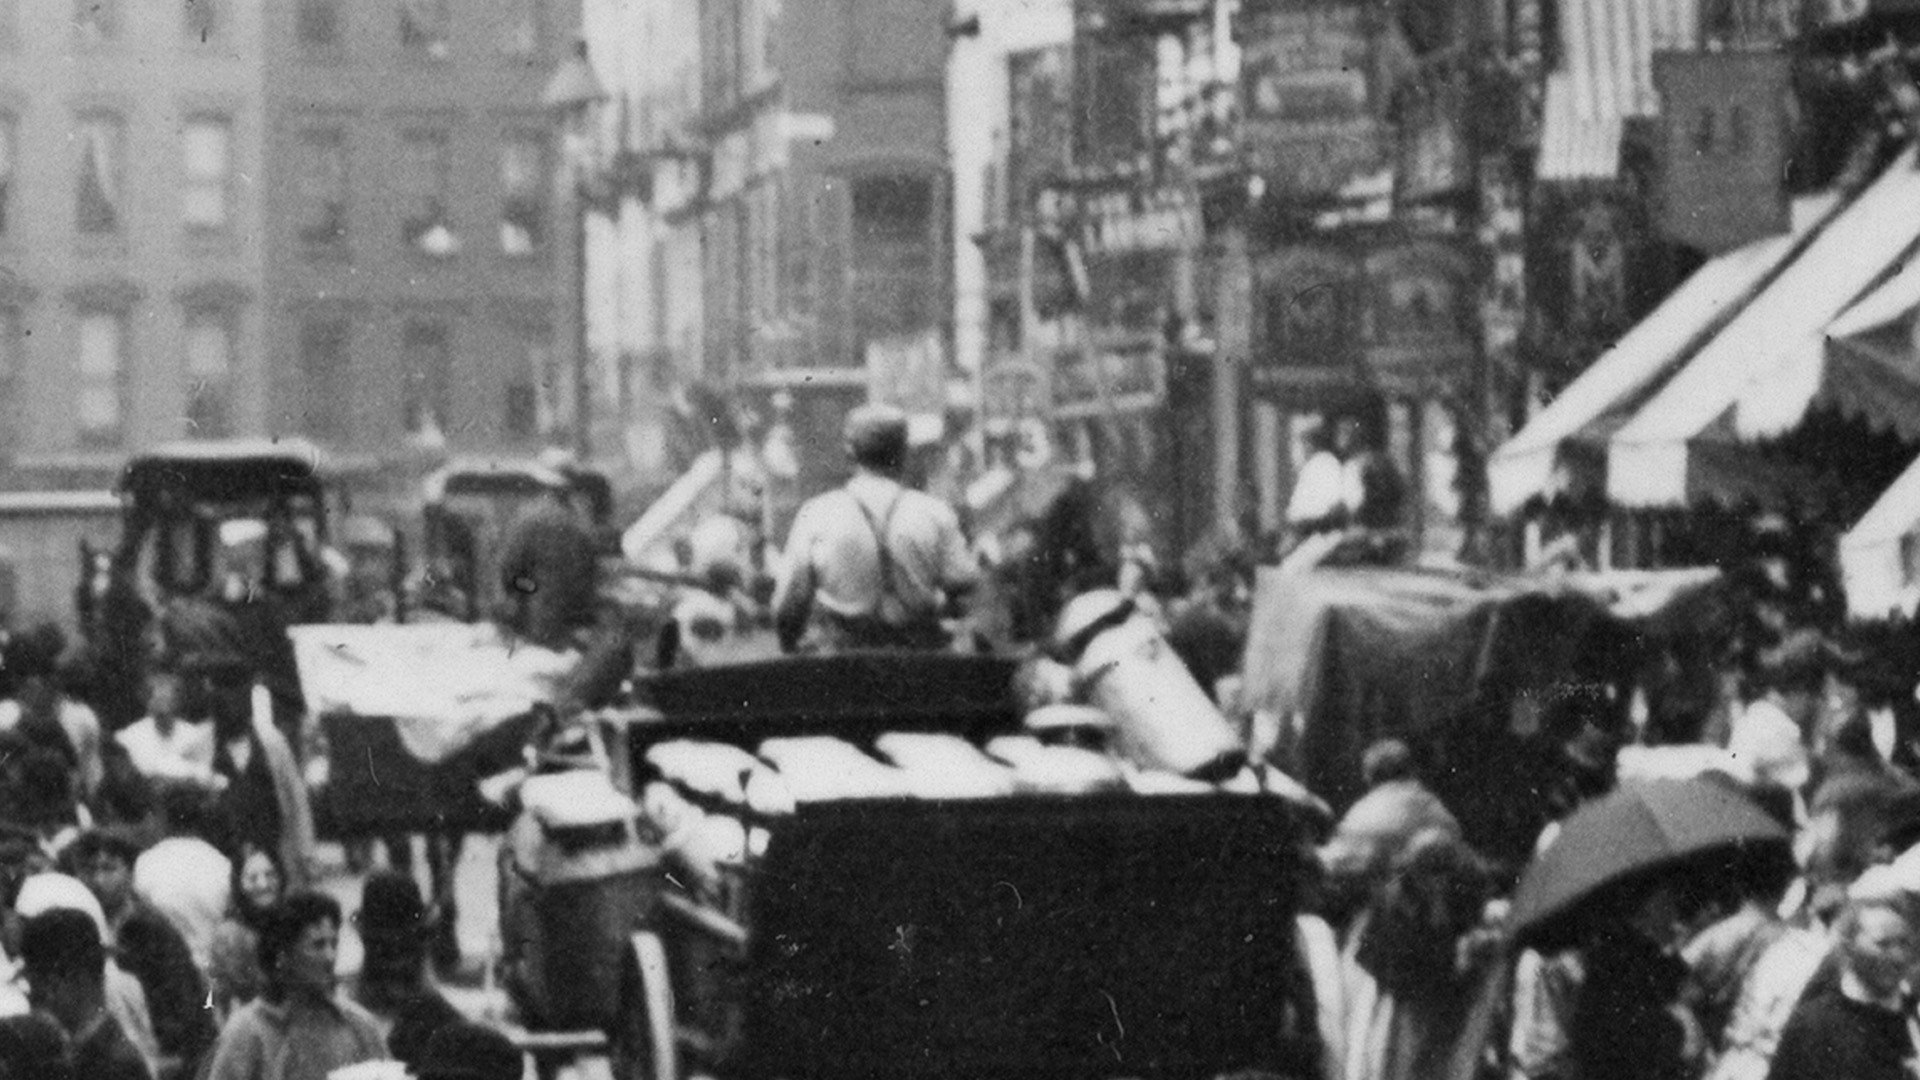 Another enlarged section of the first photo. A man is driving a horse drawn cart, filled with milk jugs, down the street. He is surrounded on all sides by people shopping.